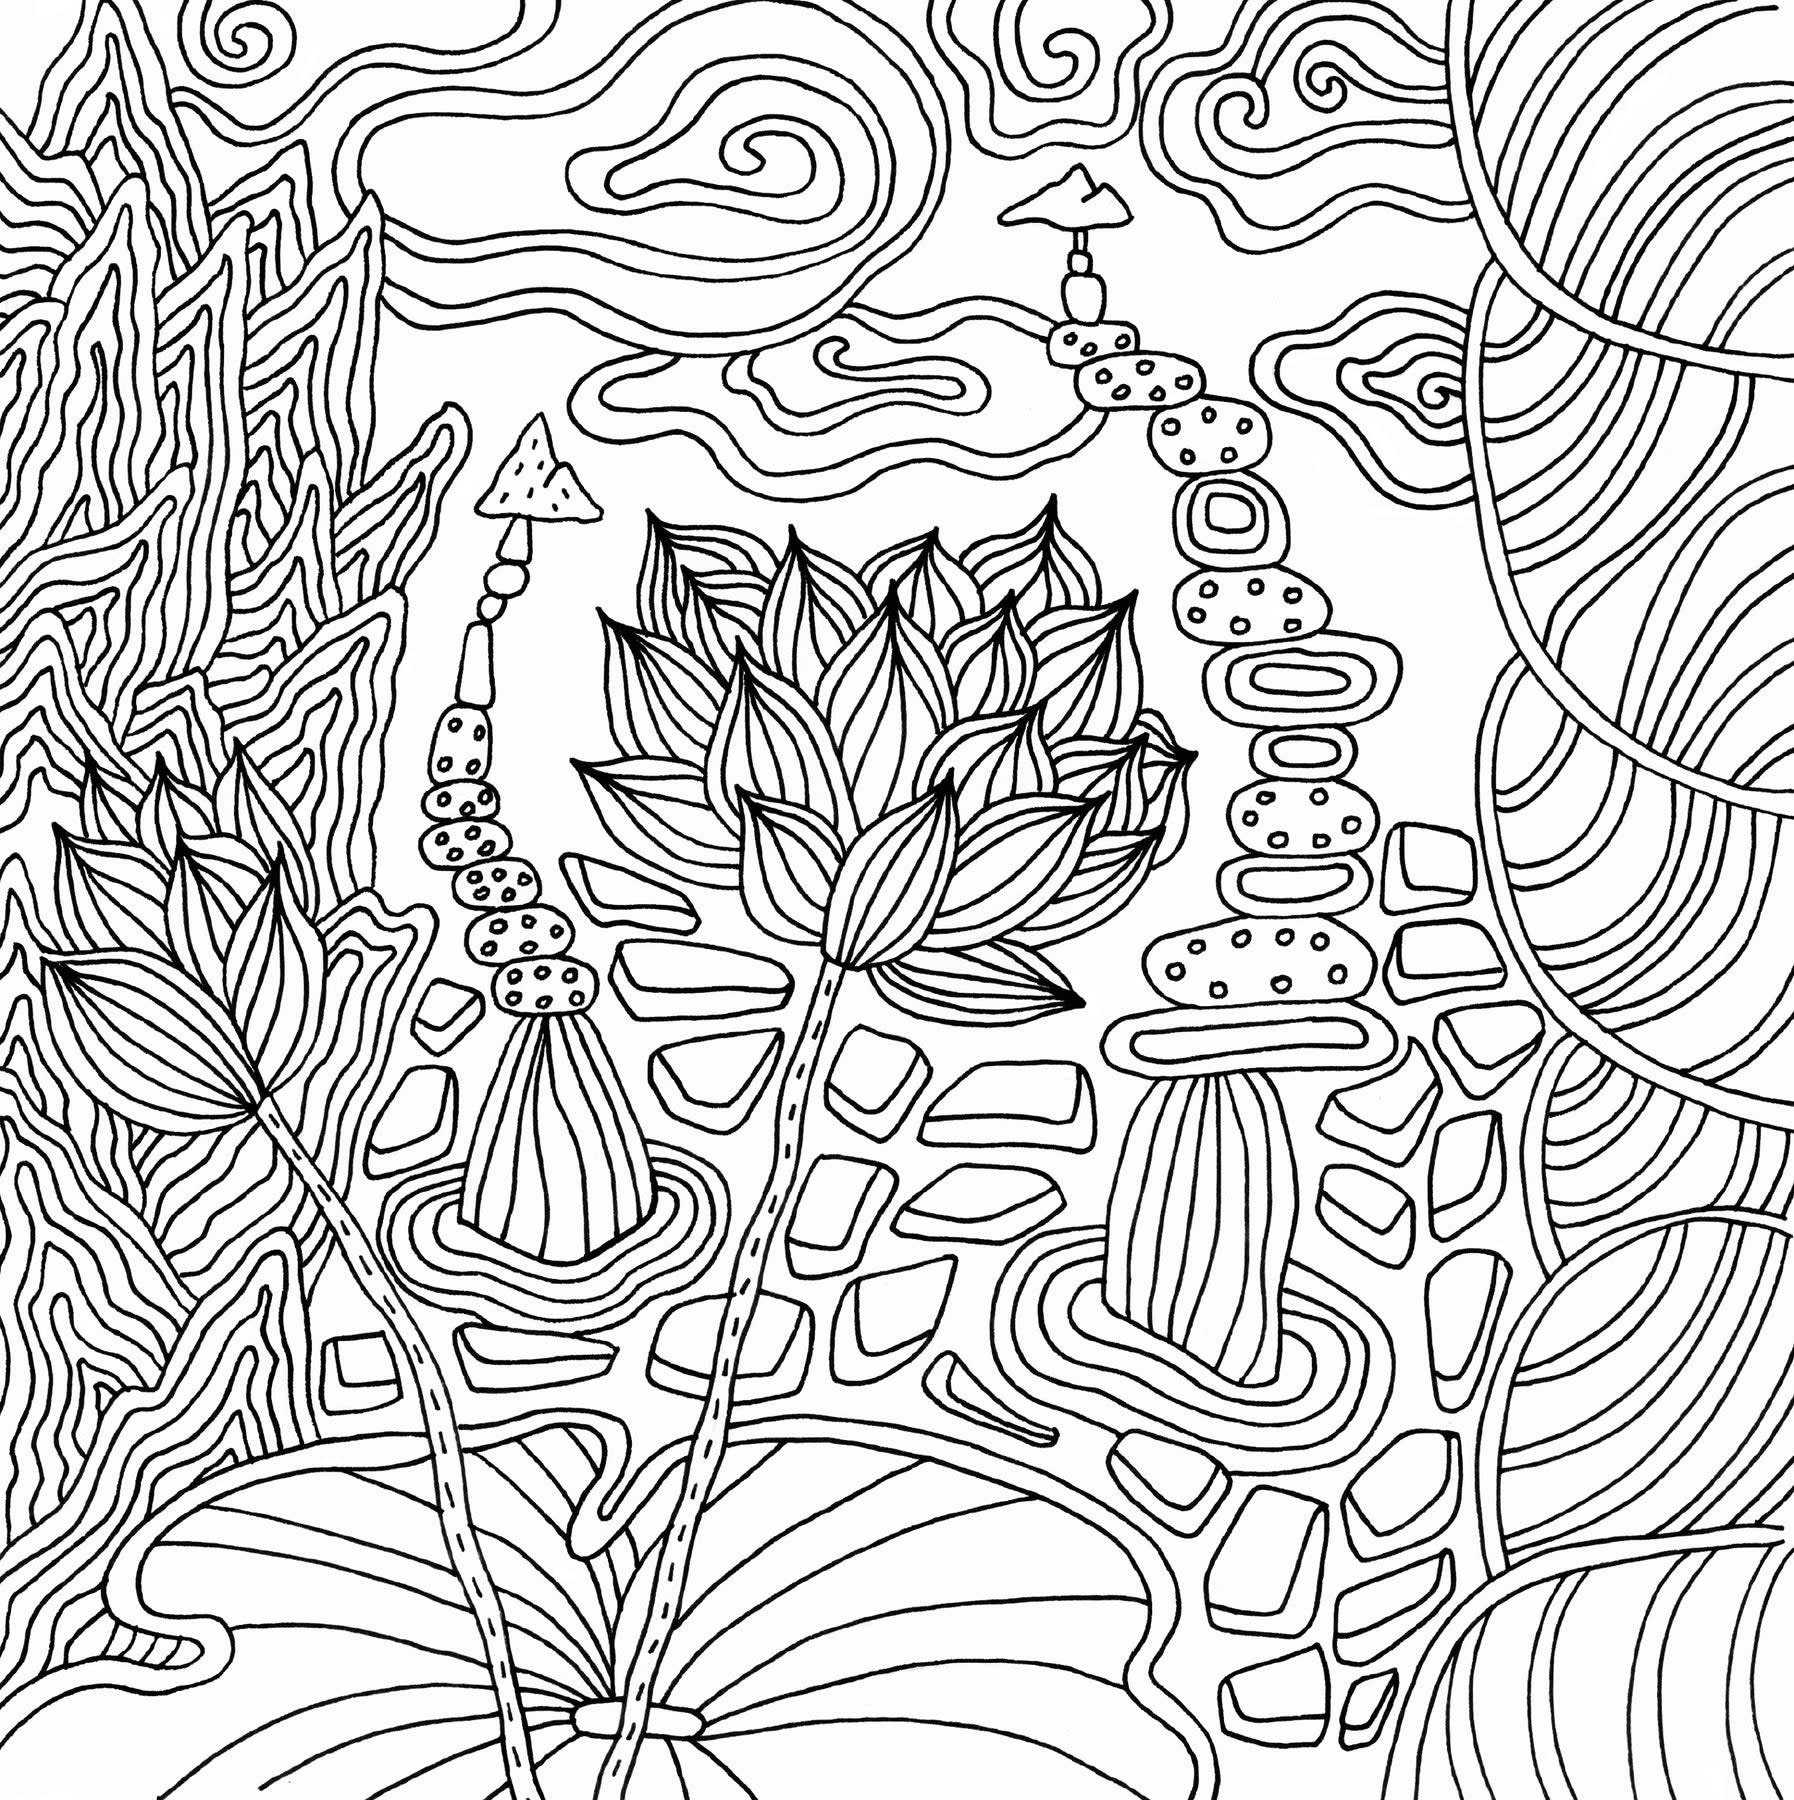 Colouring Book - Serenity